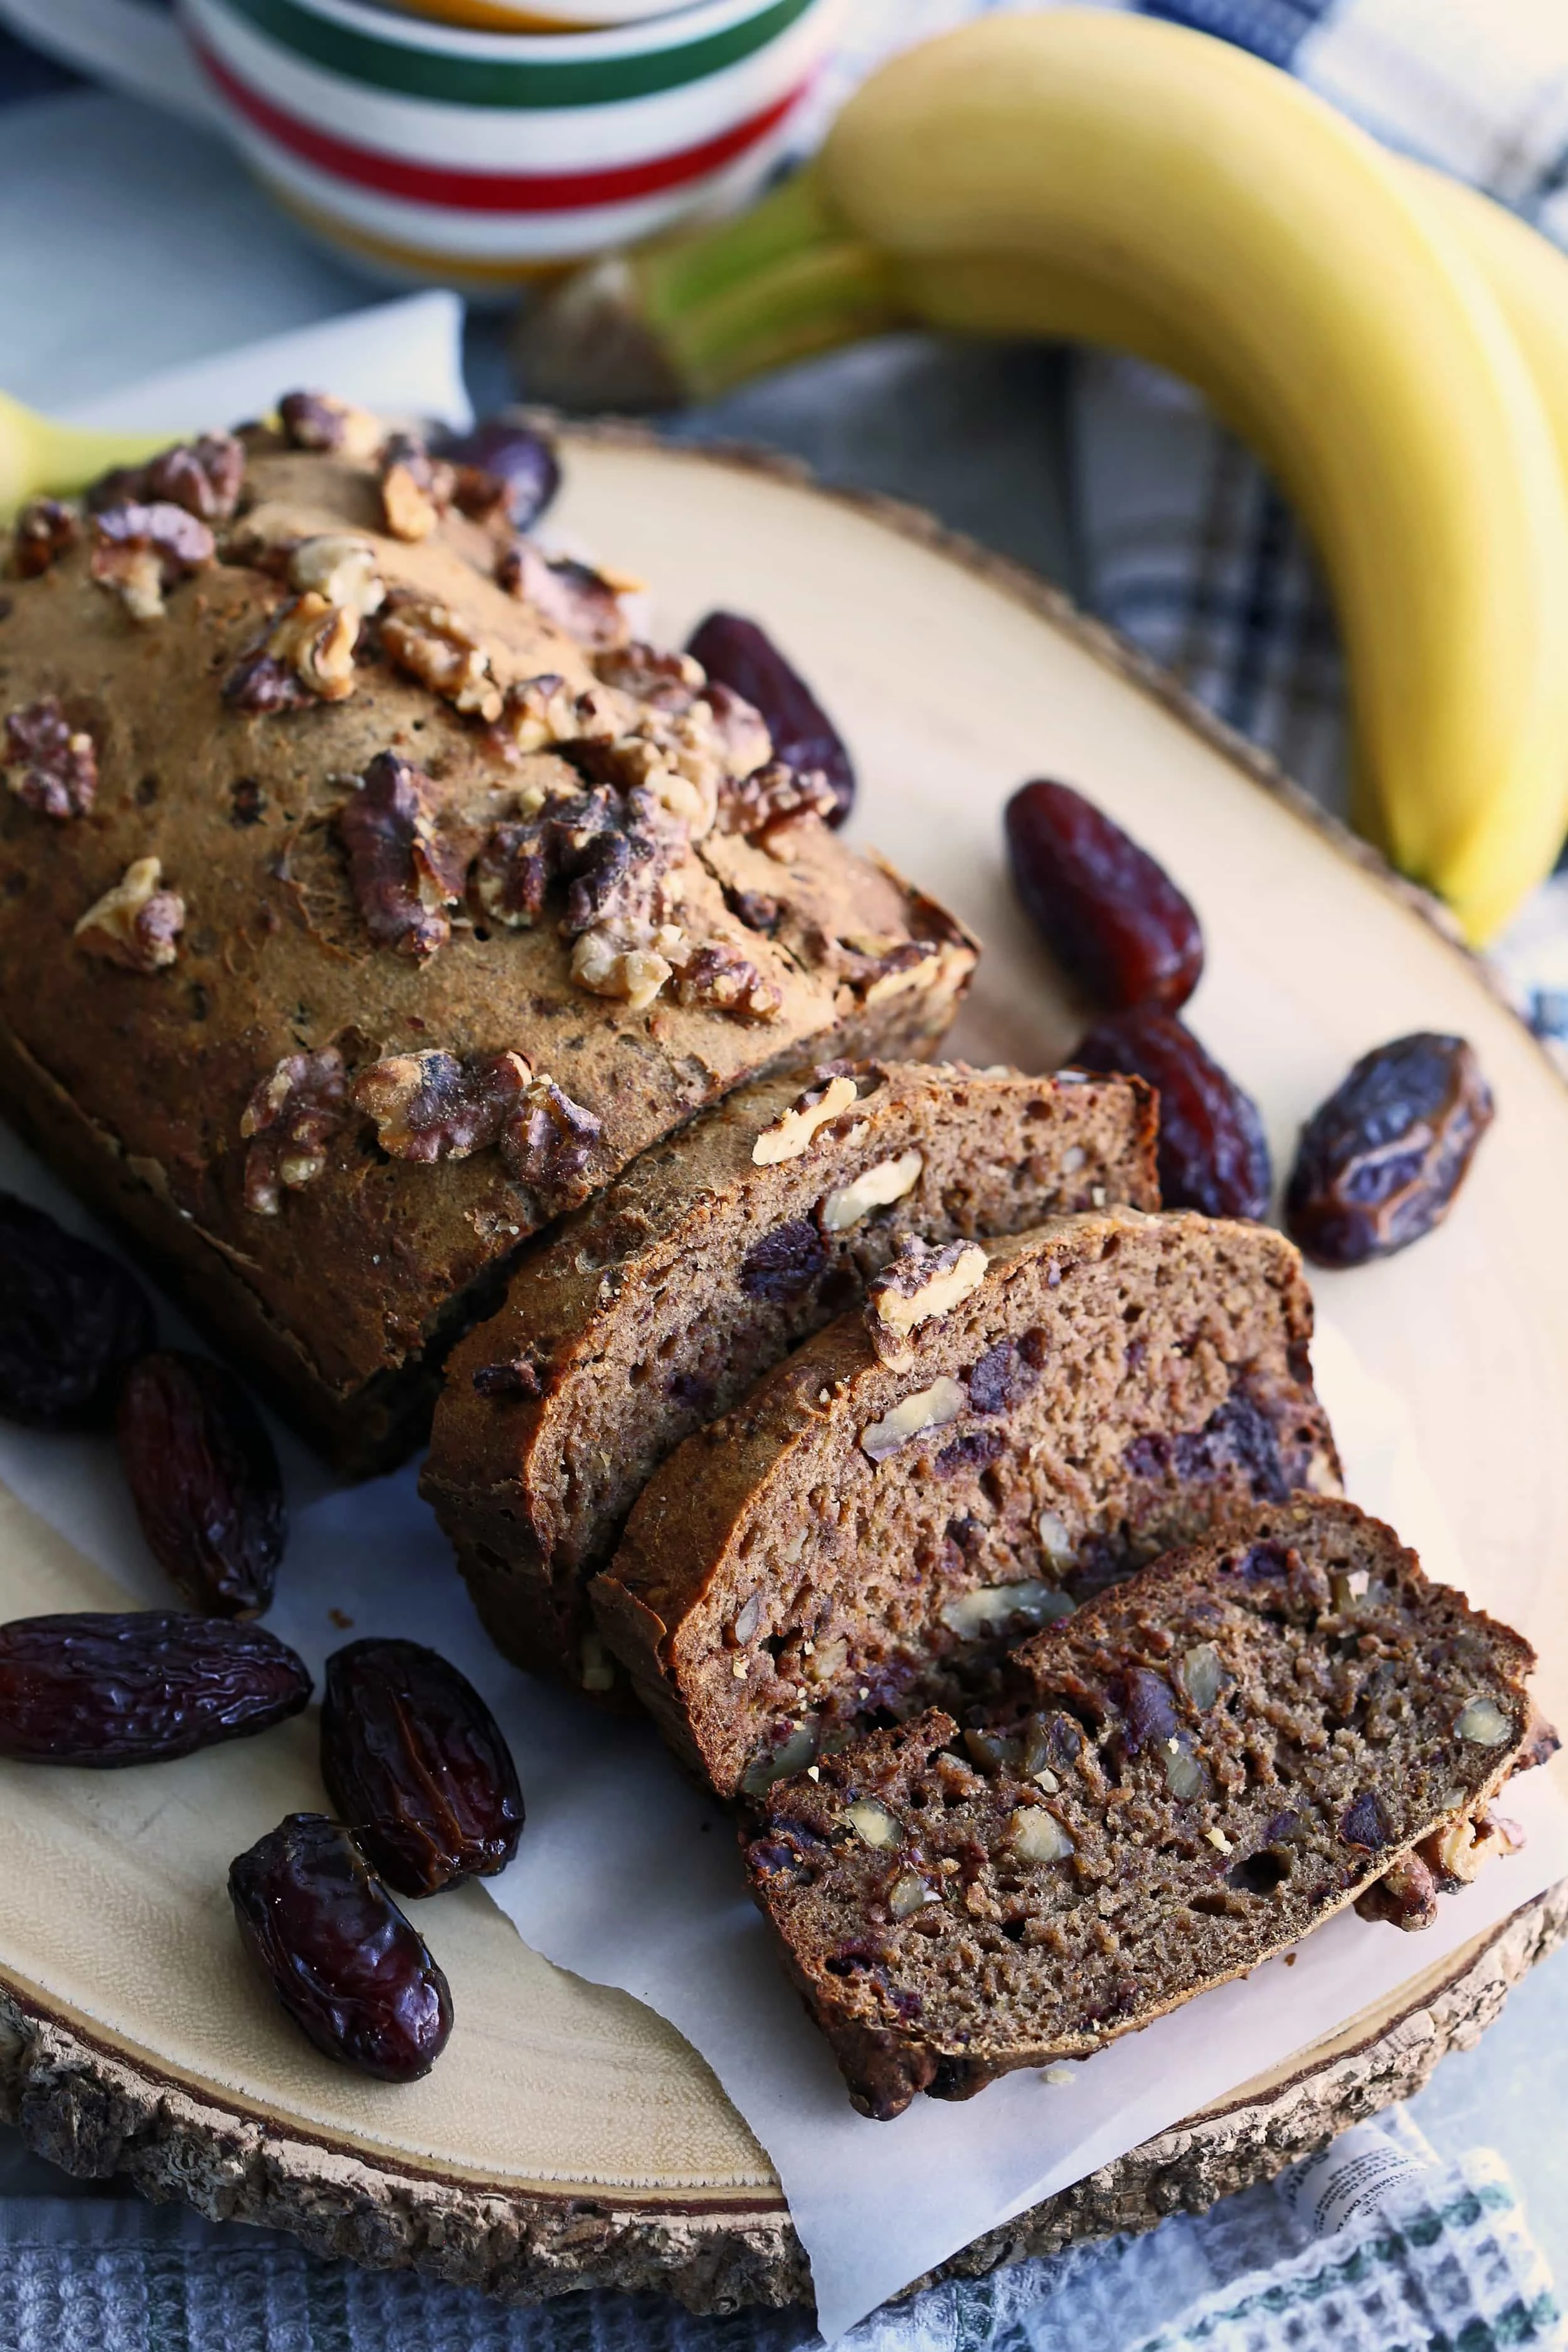 Sliced Date Banana Nut Bread surrounded by Medjool dates on a round wooden platter.